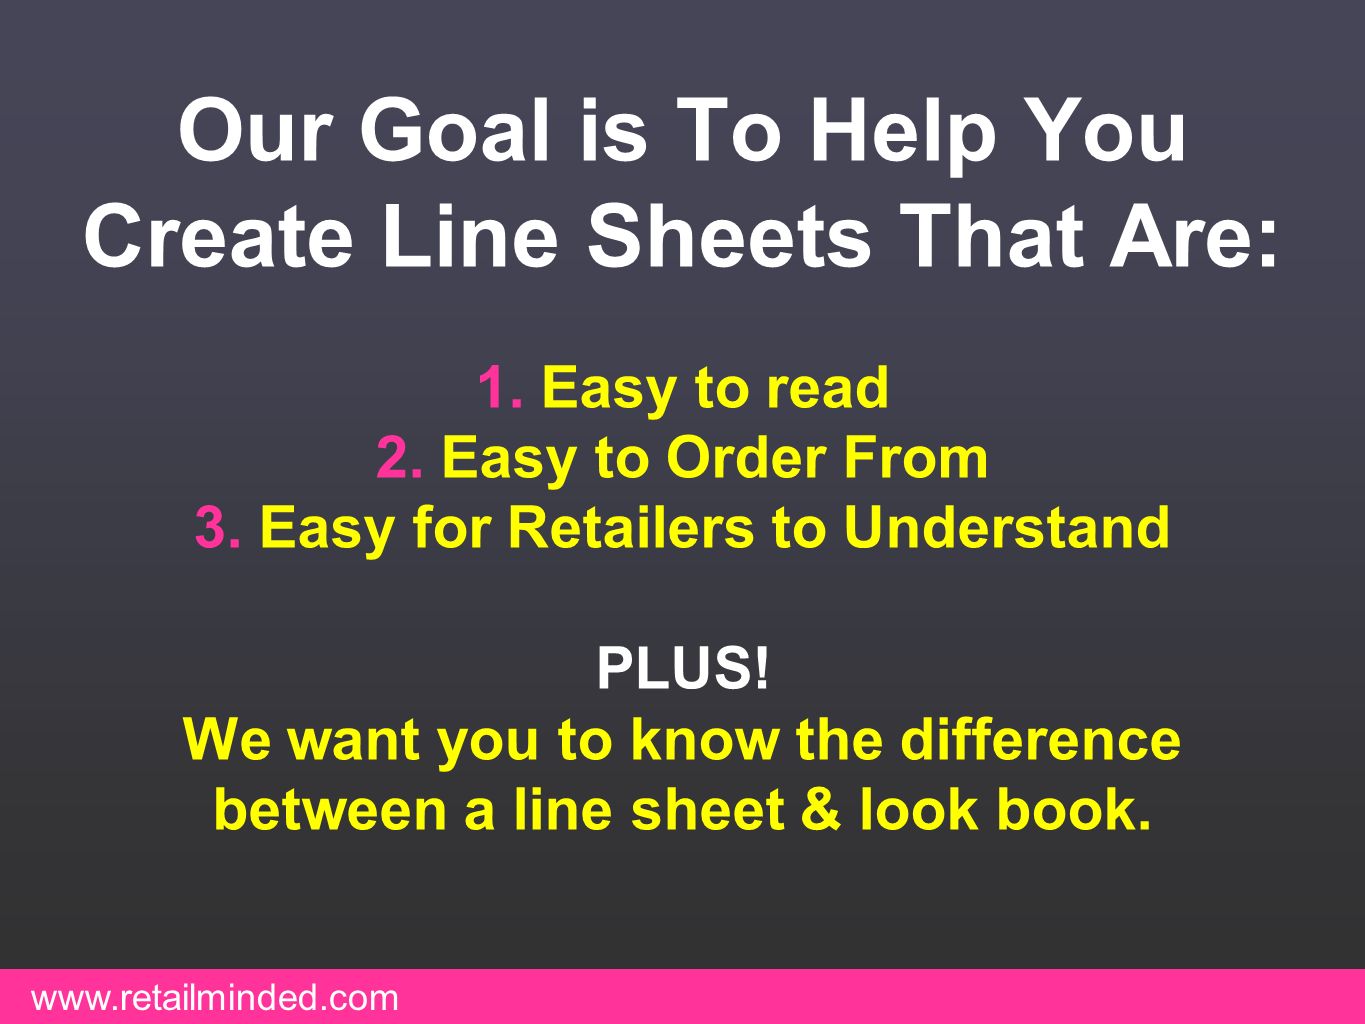 Our Goal is To Help You Create Line Sheets That Are: 1. Easy to read 2